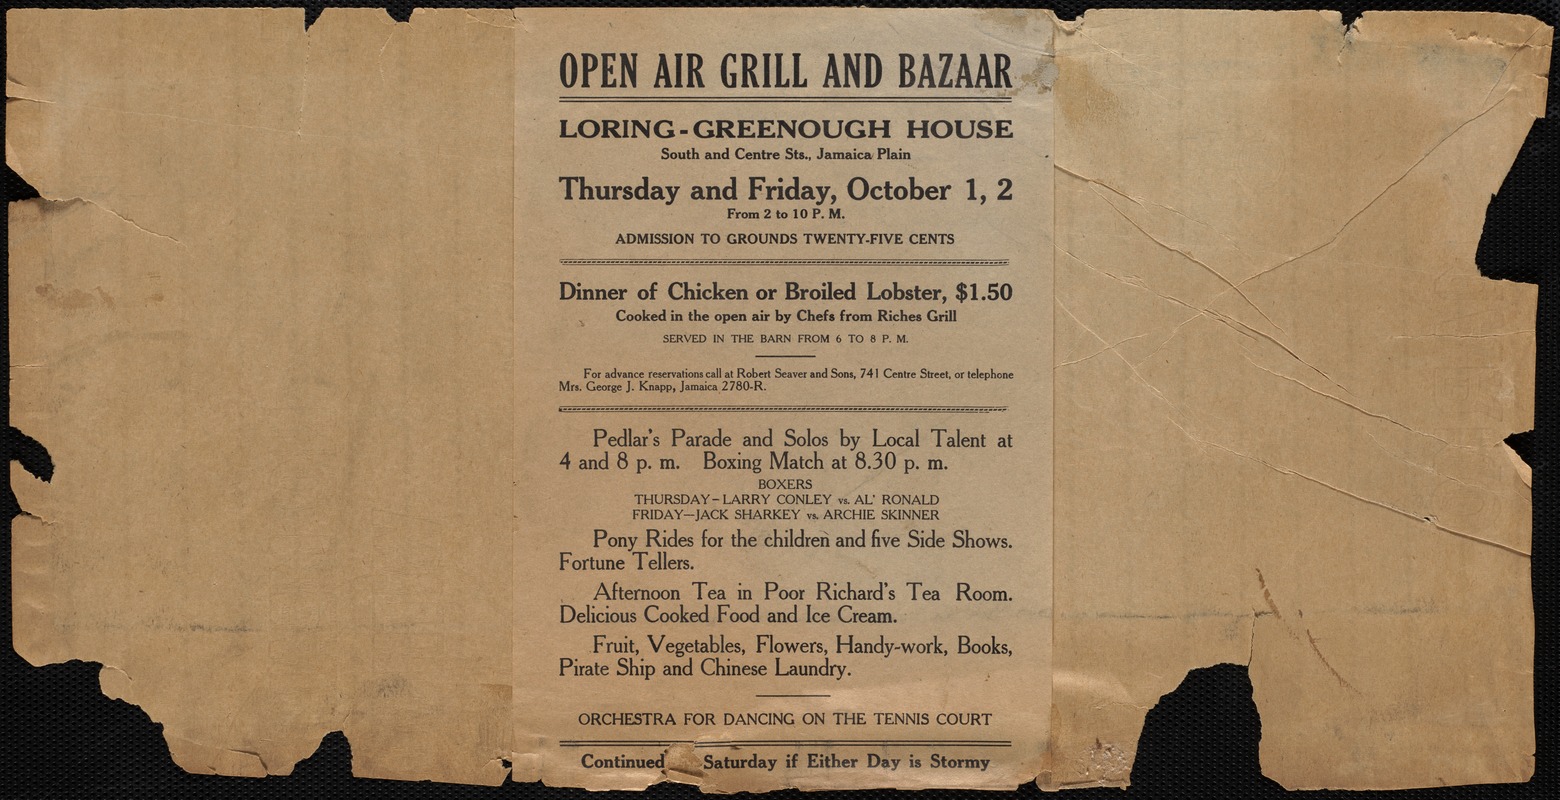 Open air grill and bazaar, Loring-Greenough House